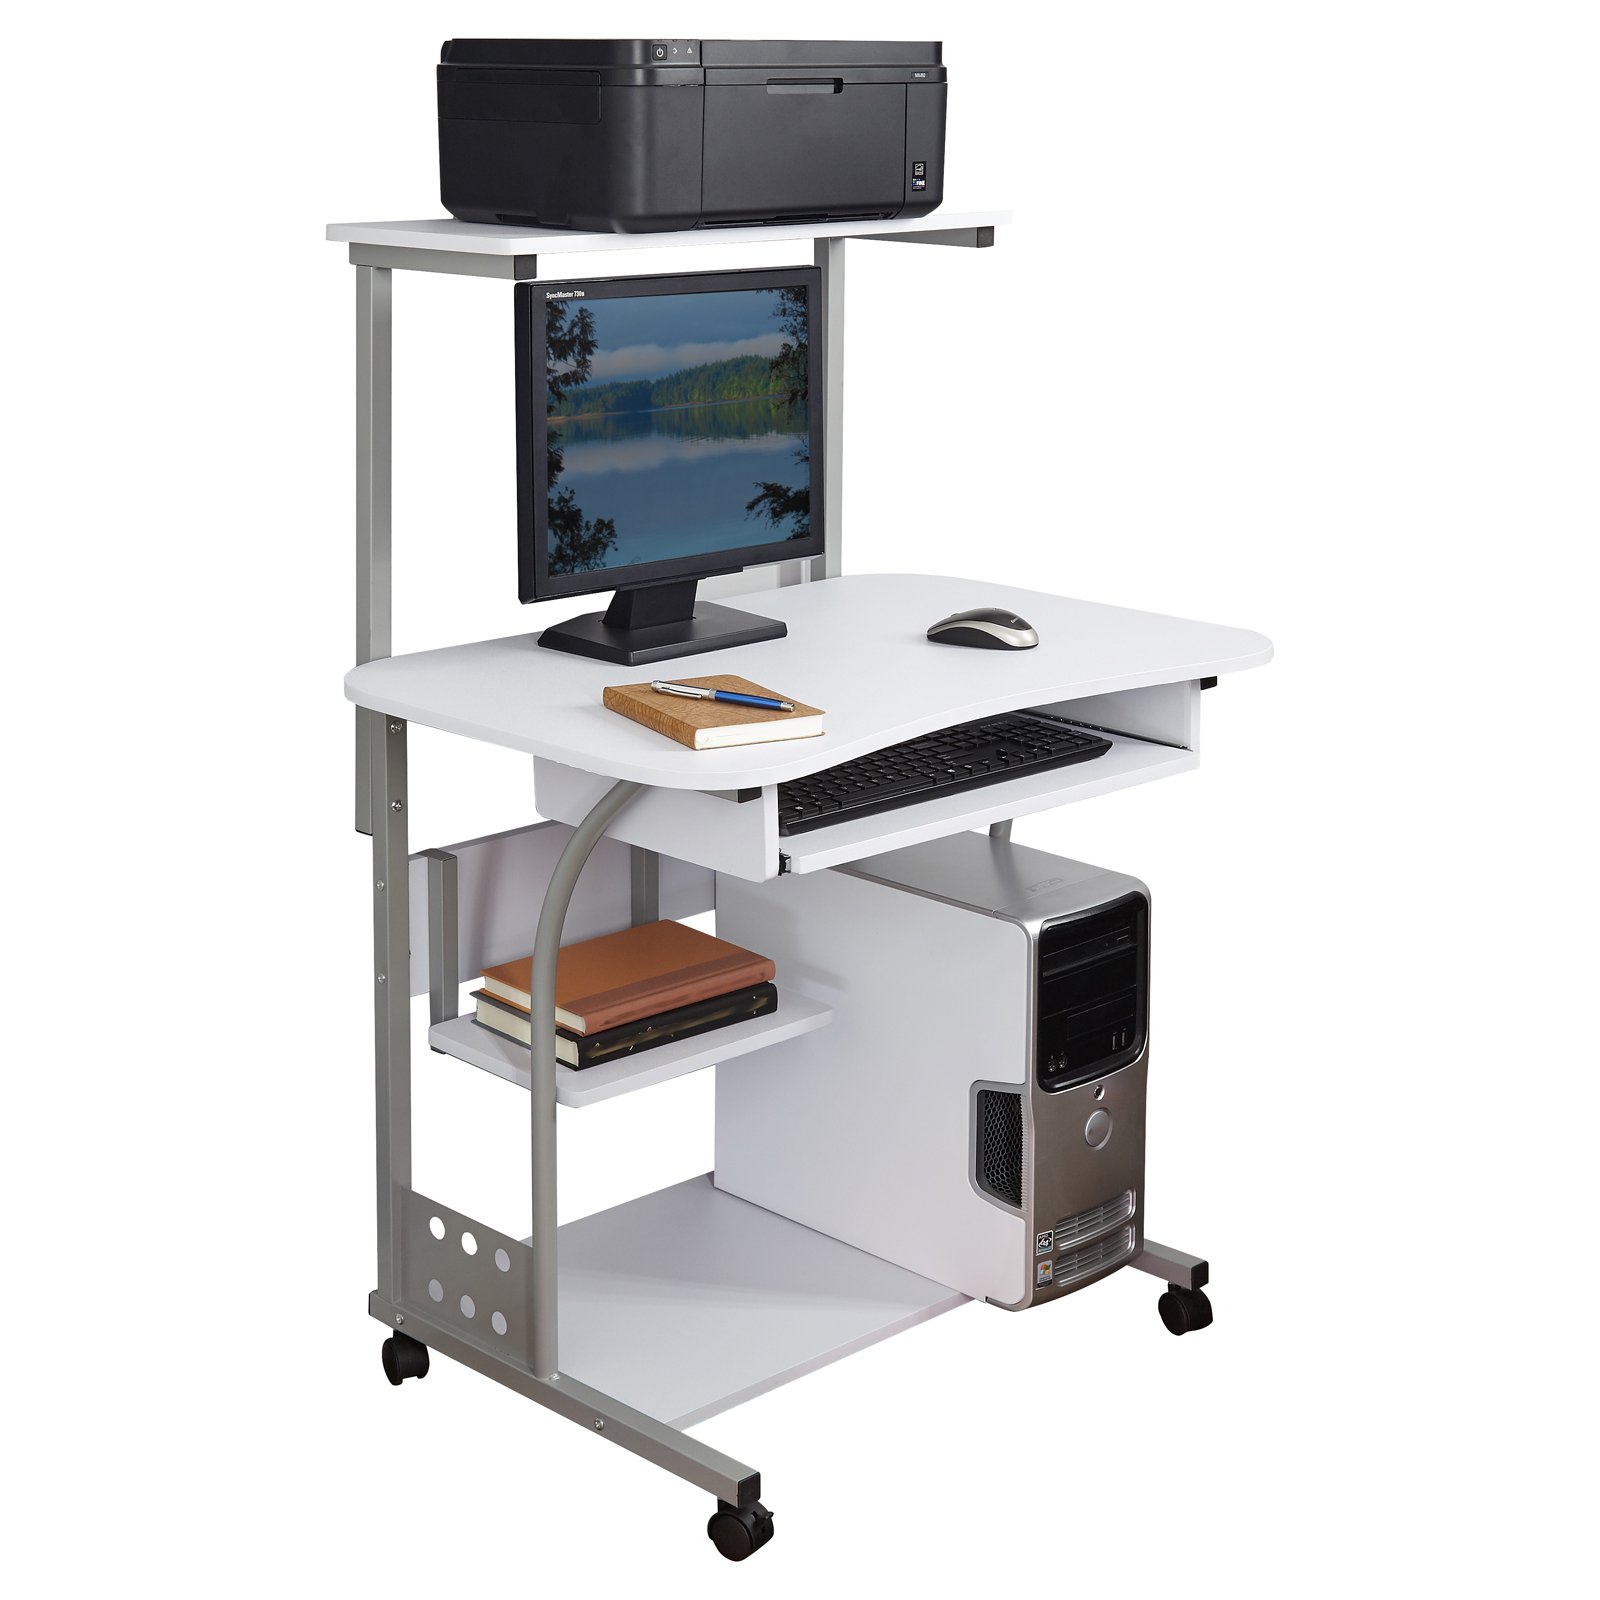 Buylateral Mobile Computer Tower Desk with Storage - image 2 of 4